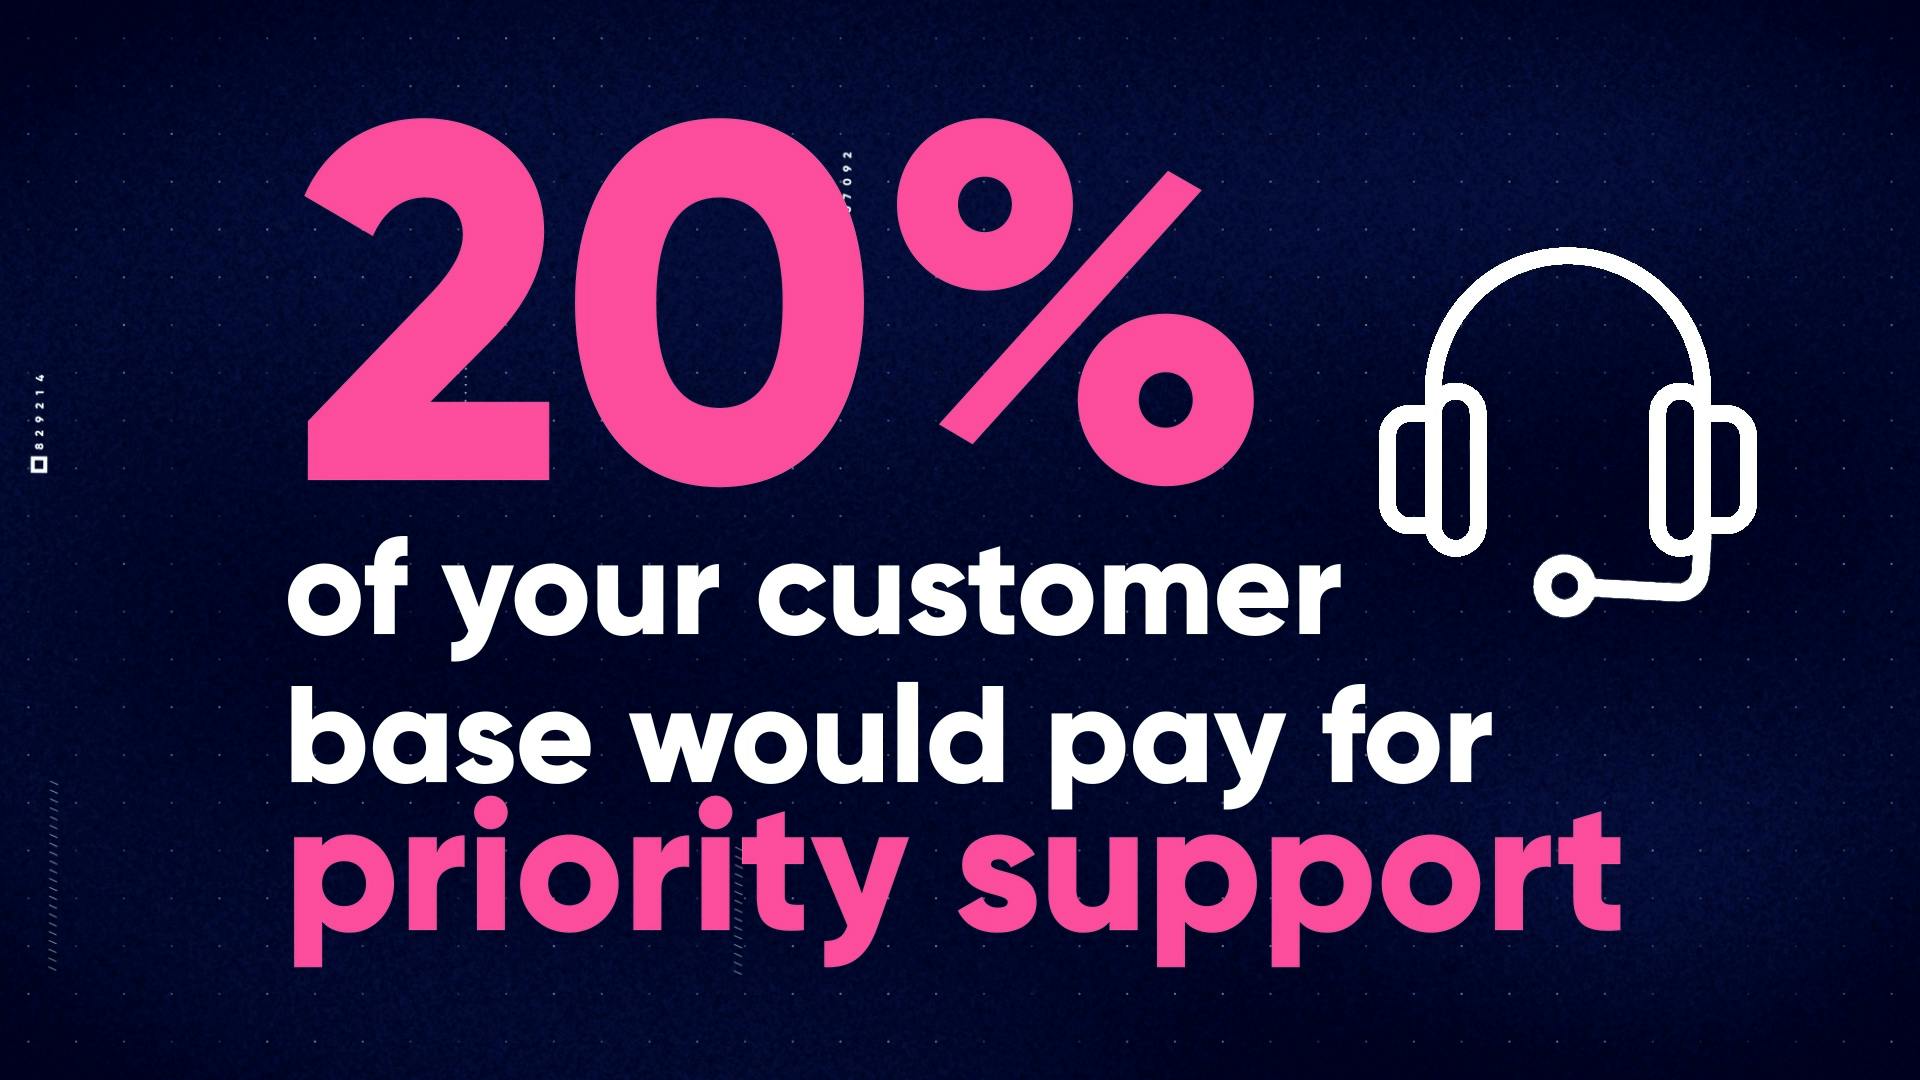 20% of your customer base would pay for priority support